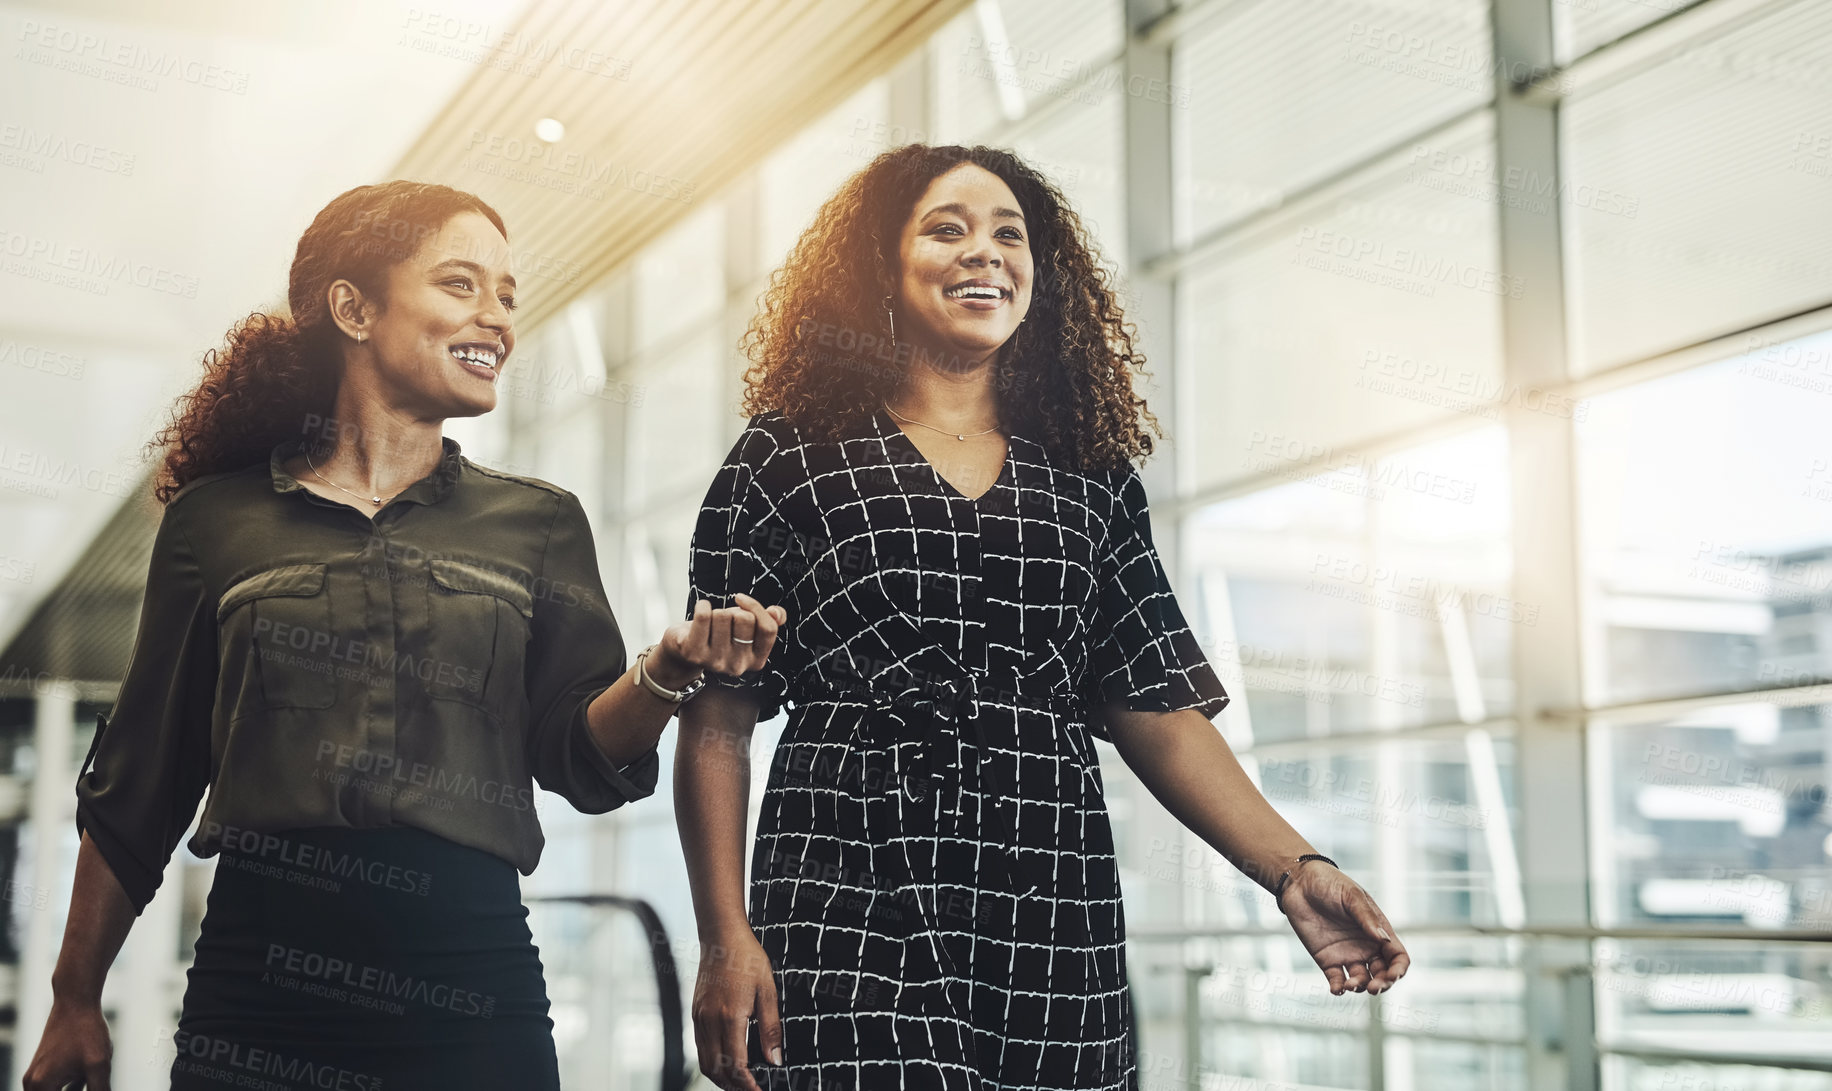 Buy stock photo Cropped shot of two attractive young businesswomen walking through a modern workplace